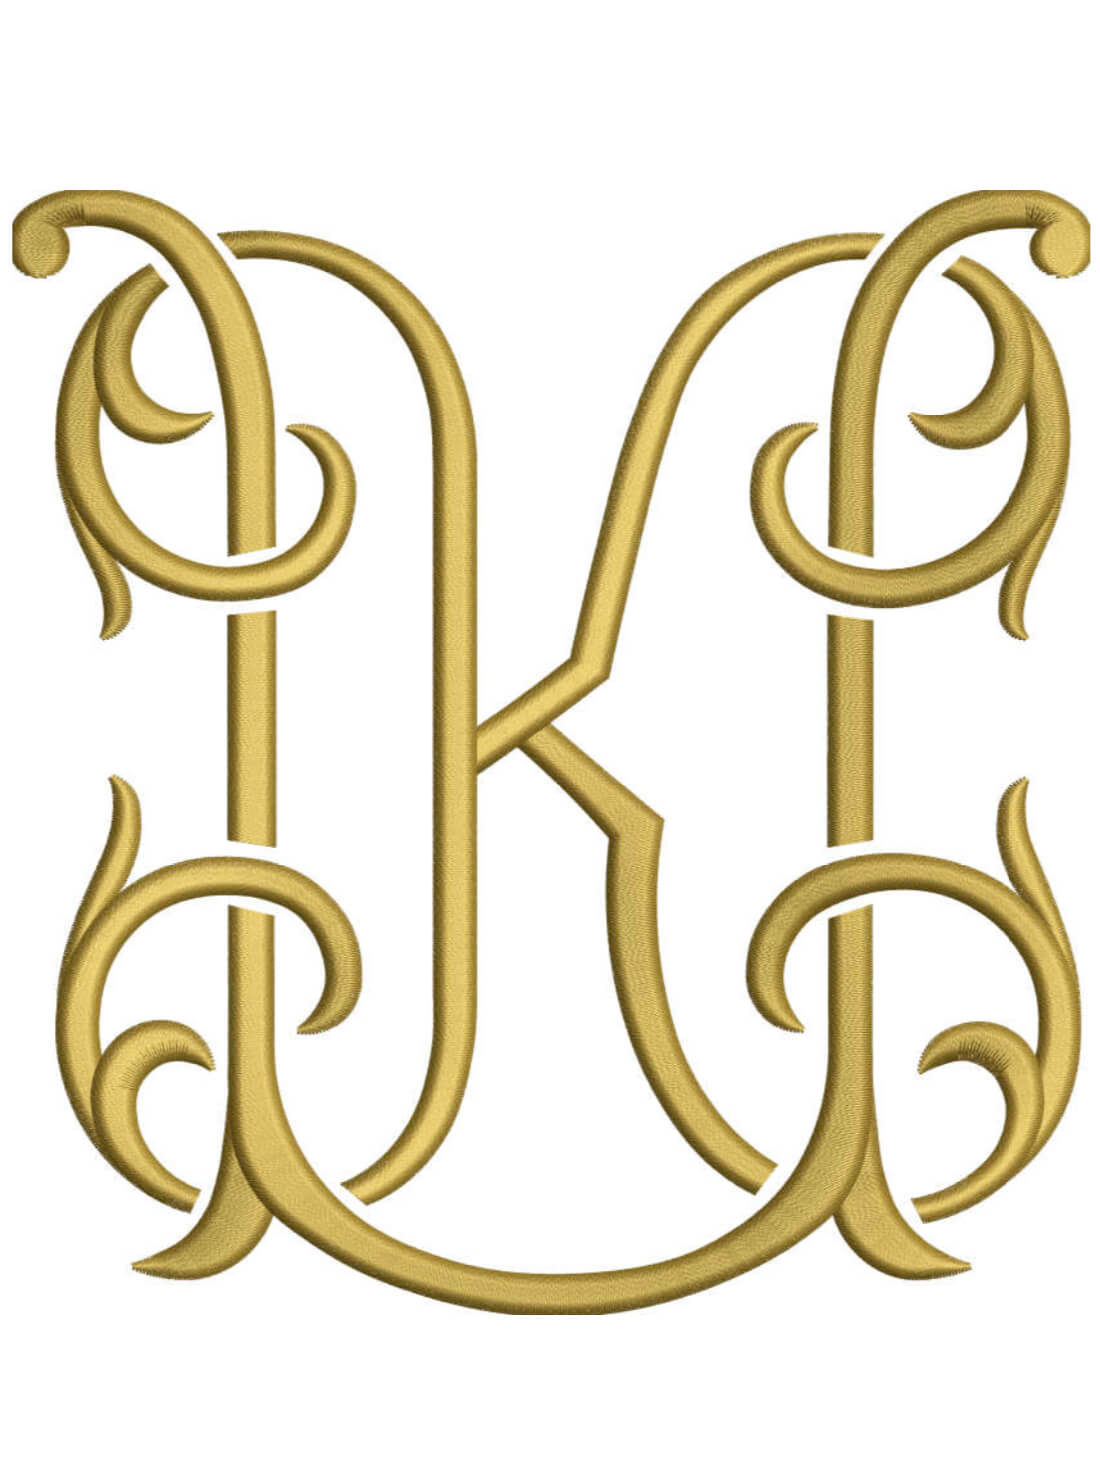 Monogram Couture KU for Embroidery